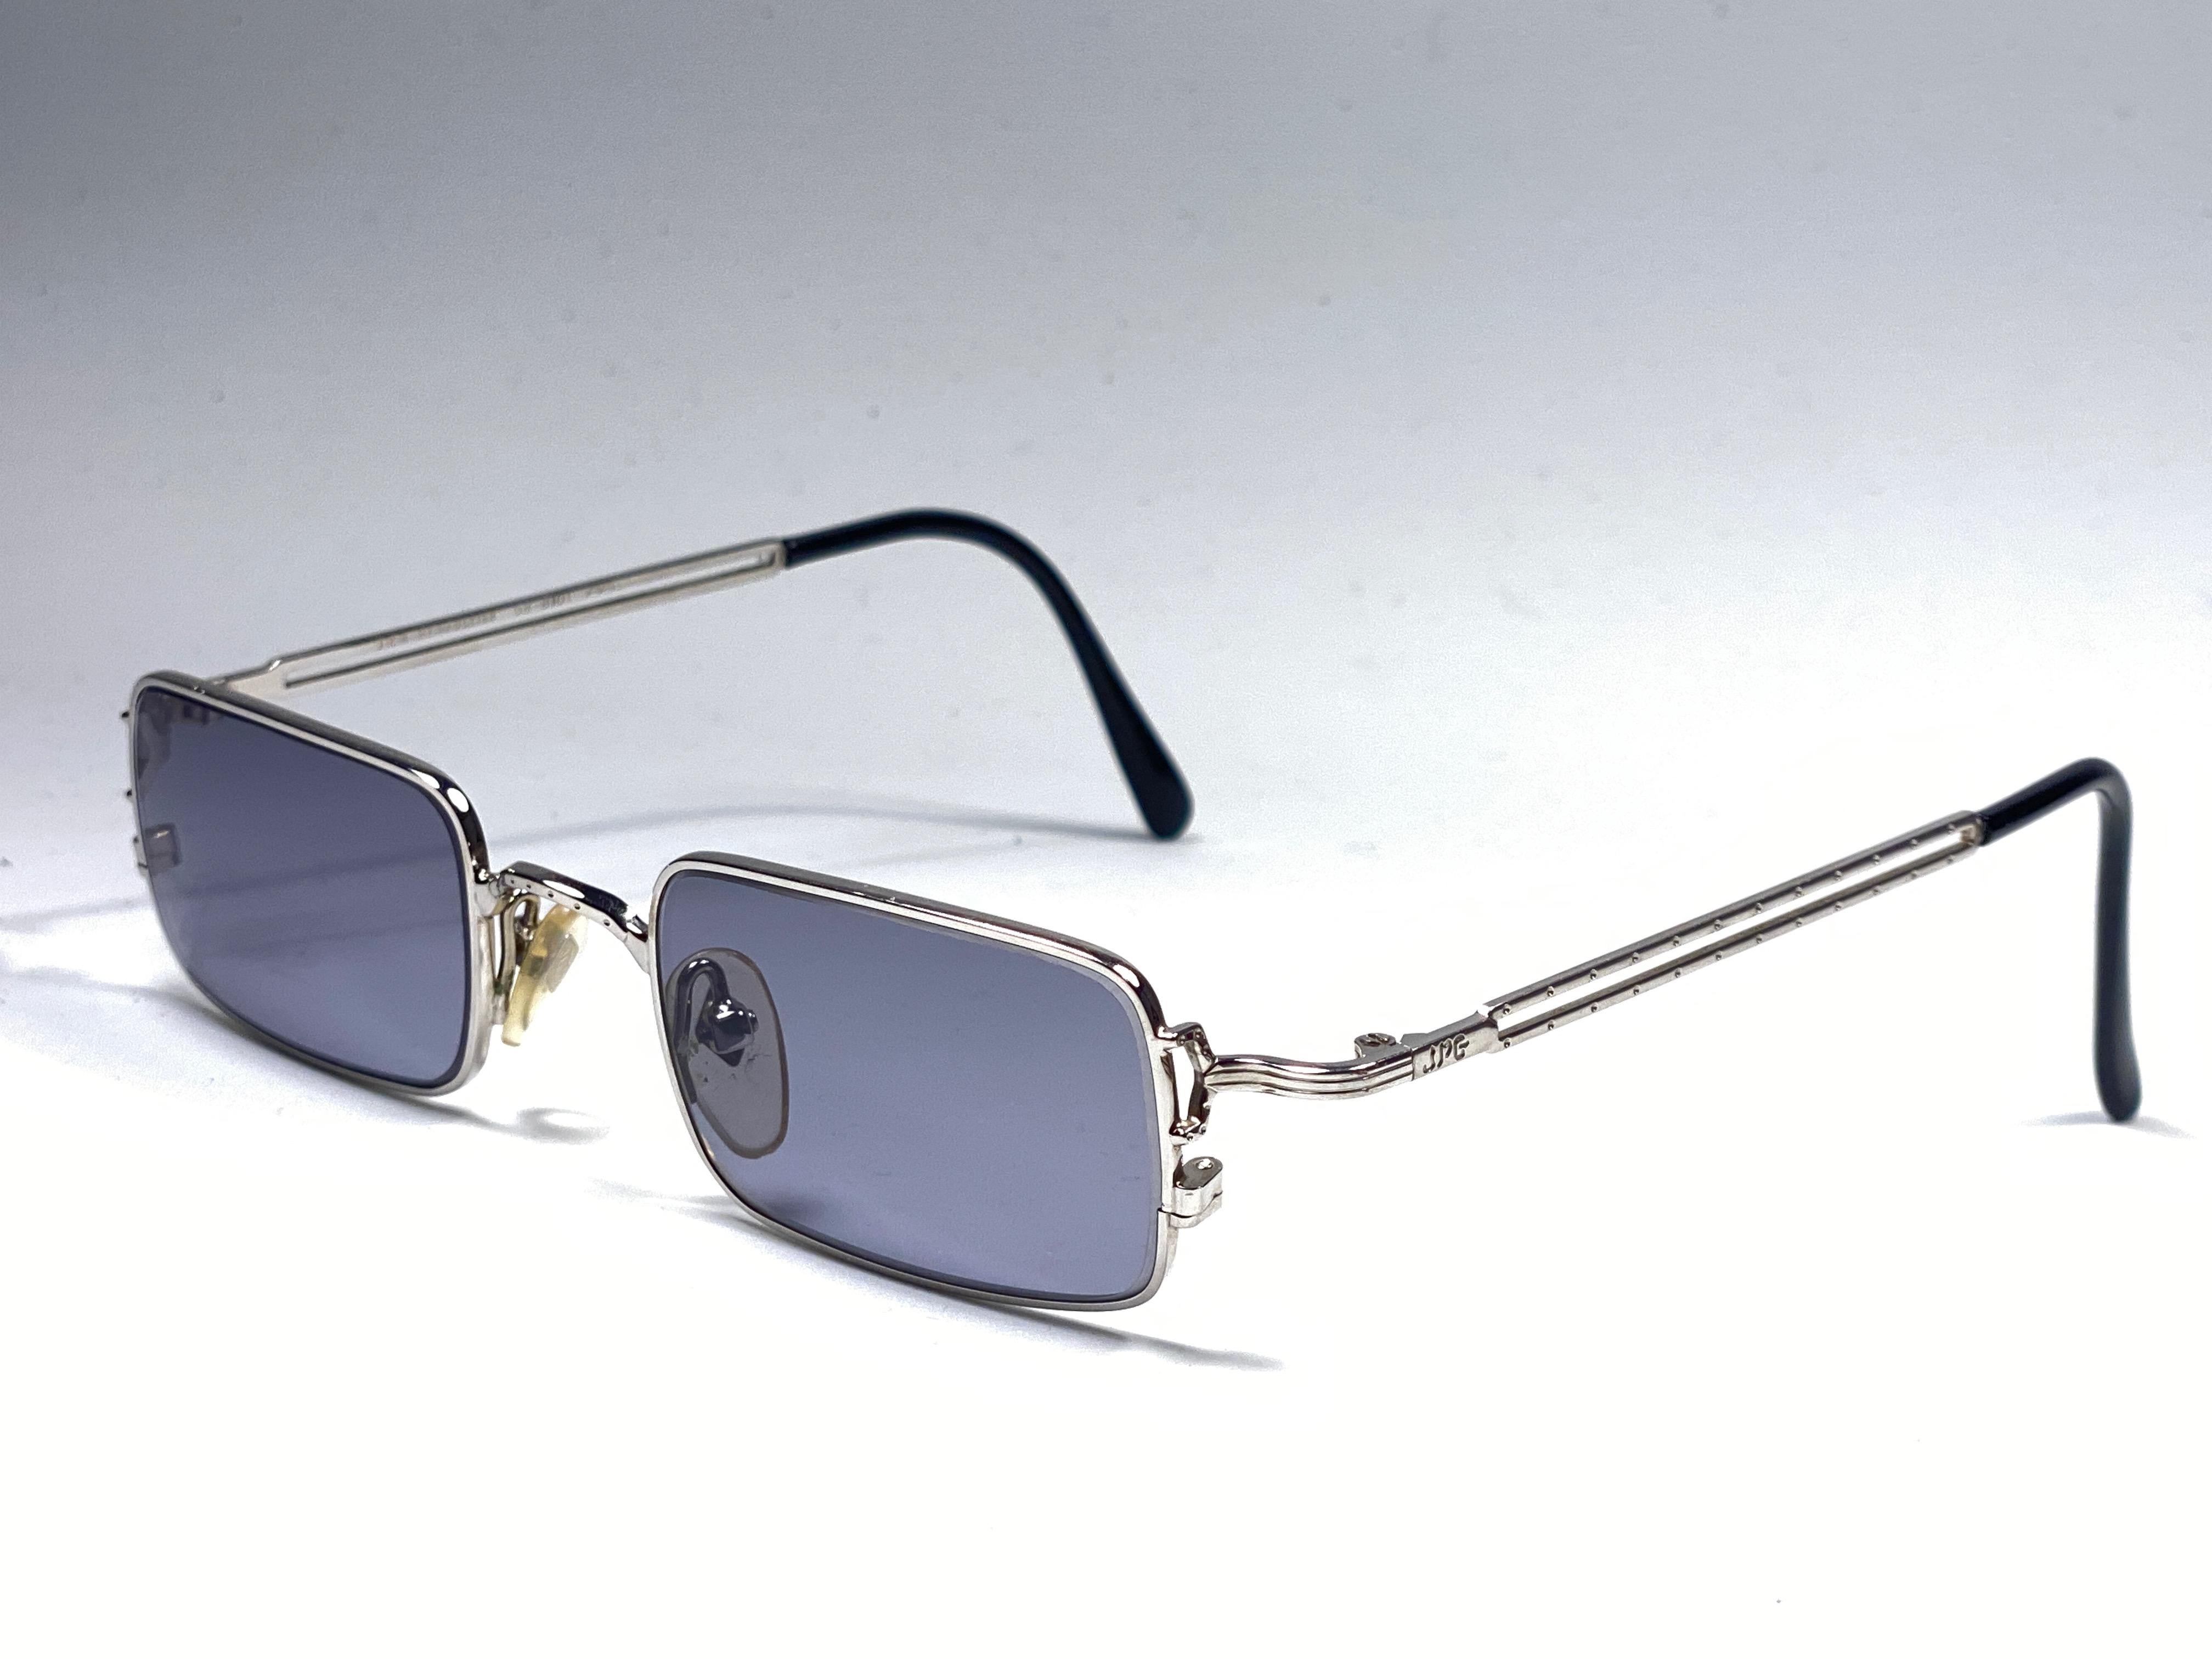 Mint Vintage Jean Paul Gaultier Junior silver frame.
Spotless medium lenses.
Design and produced in the 1900's a timeless and iconic piece.
Minor sign of wear on the frame.
A true fashion statement.

Front : 13 cms
Lens Height : 3 cms
Lens Width :